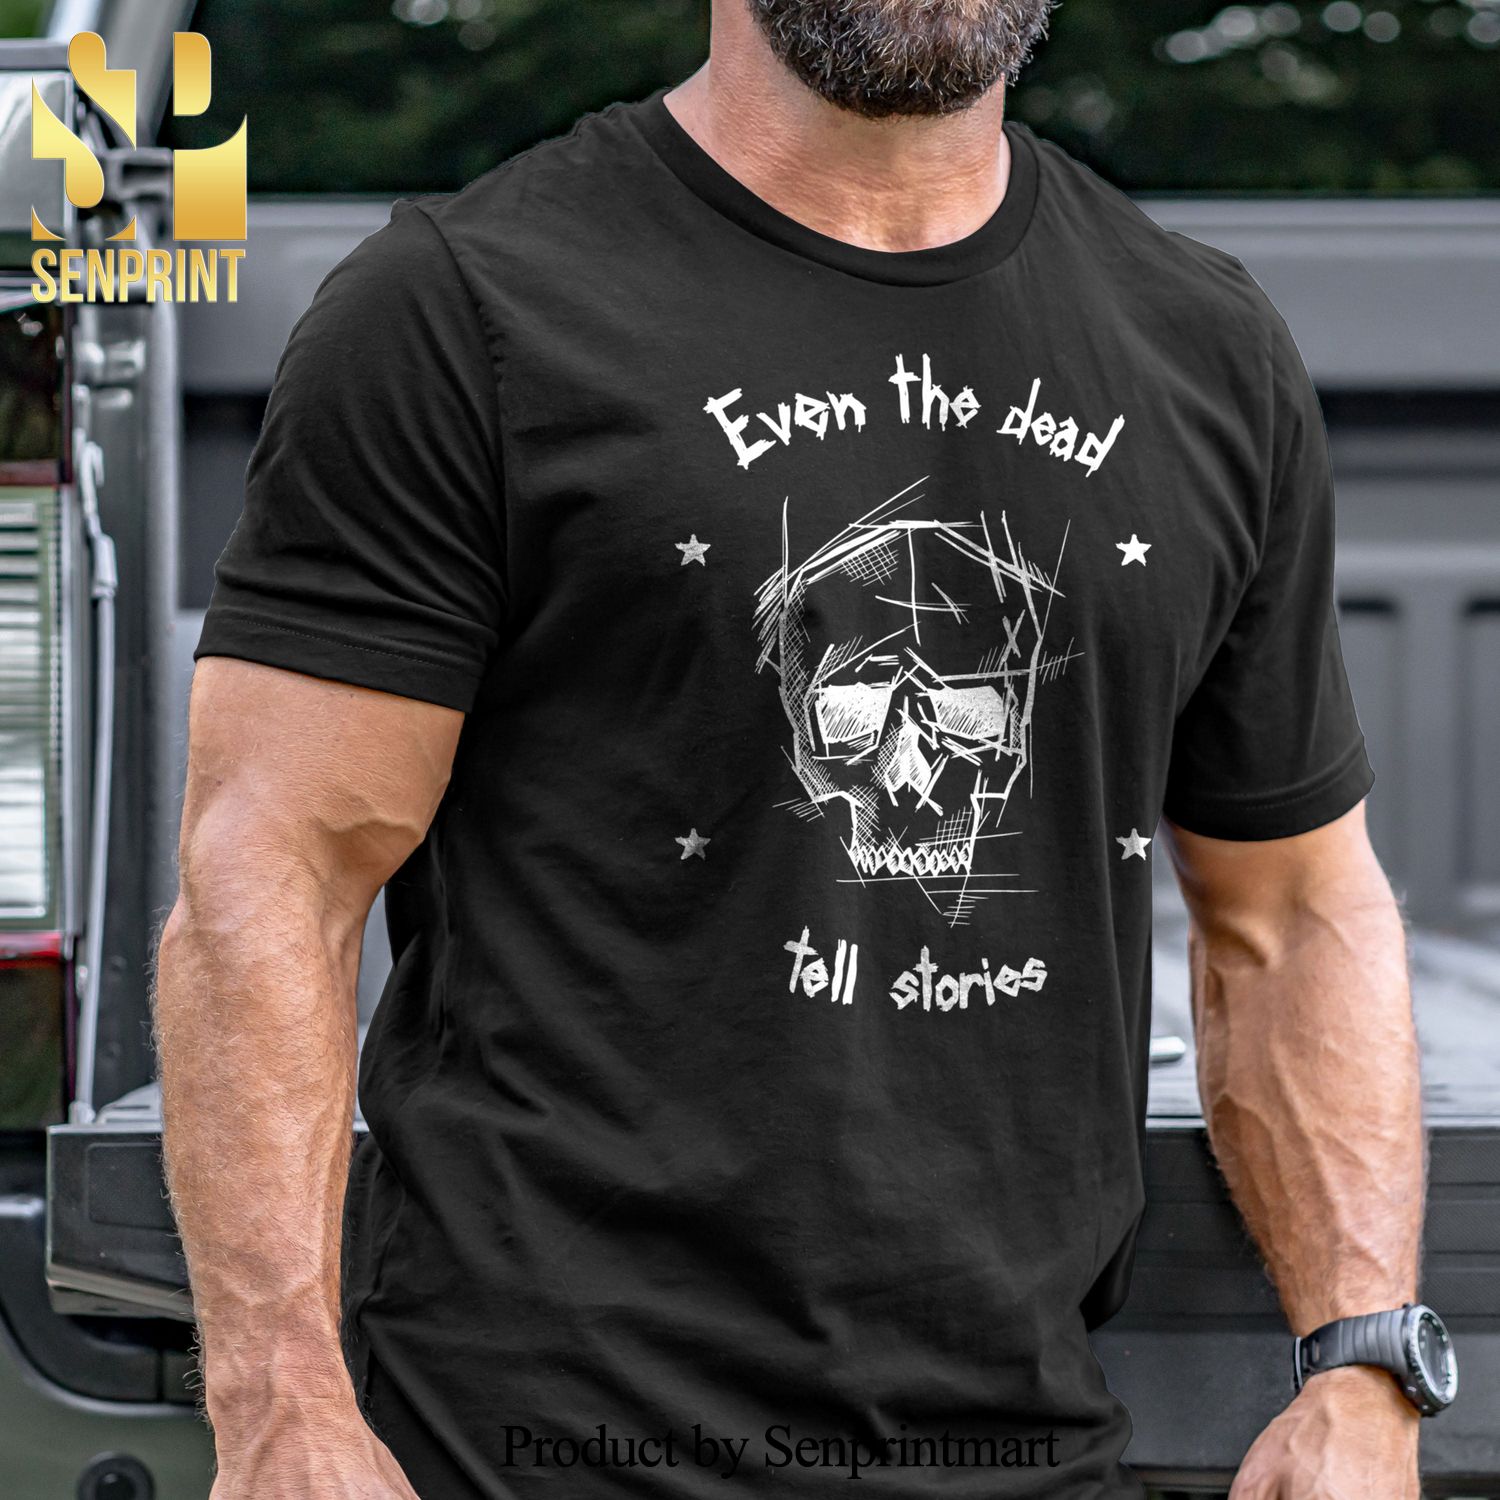 Even the Dead Military Unisex Shirt